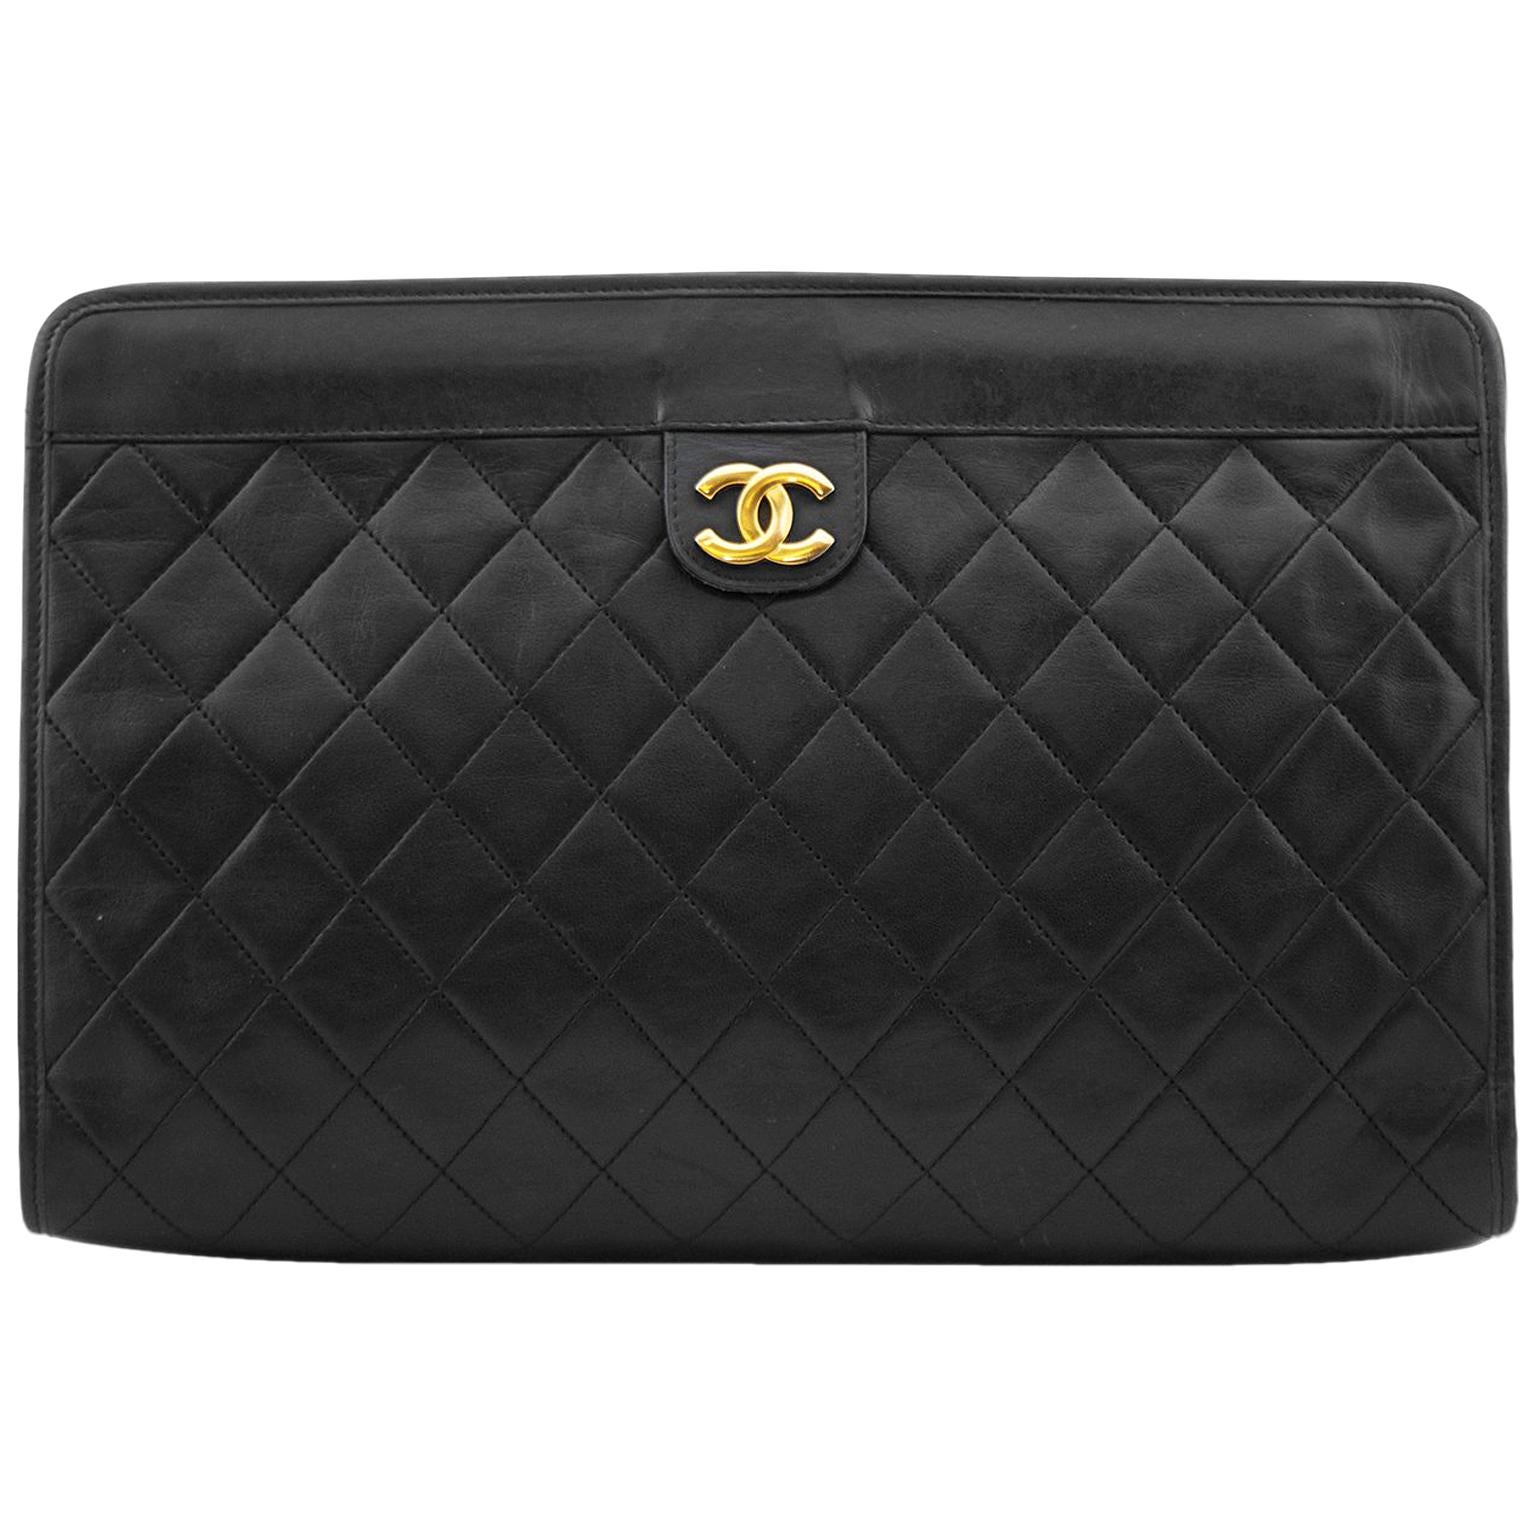 Chanel Black Quilted Lambskin Leather Portfolio Clutch Bag